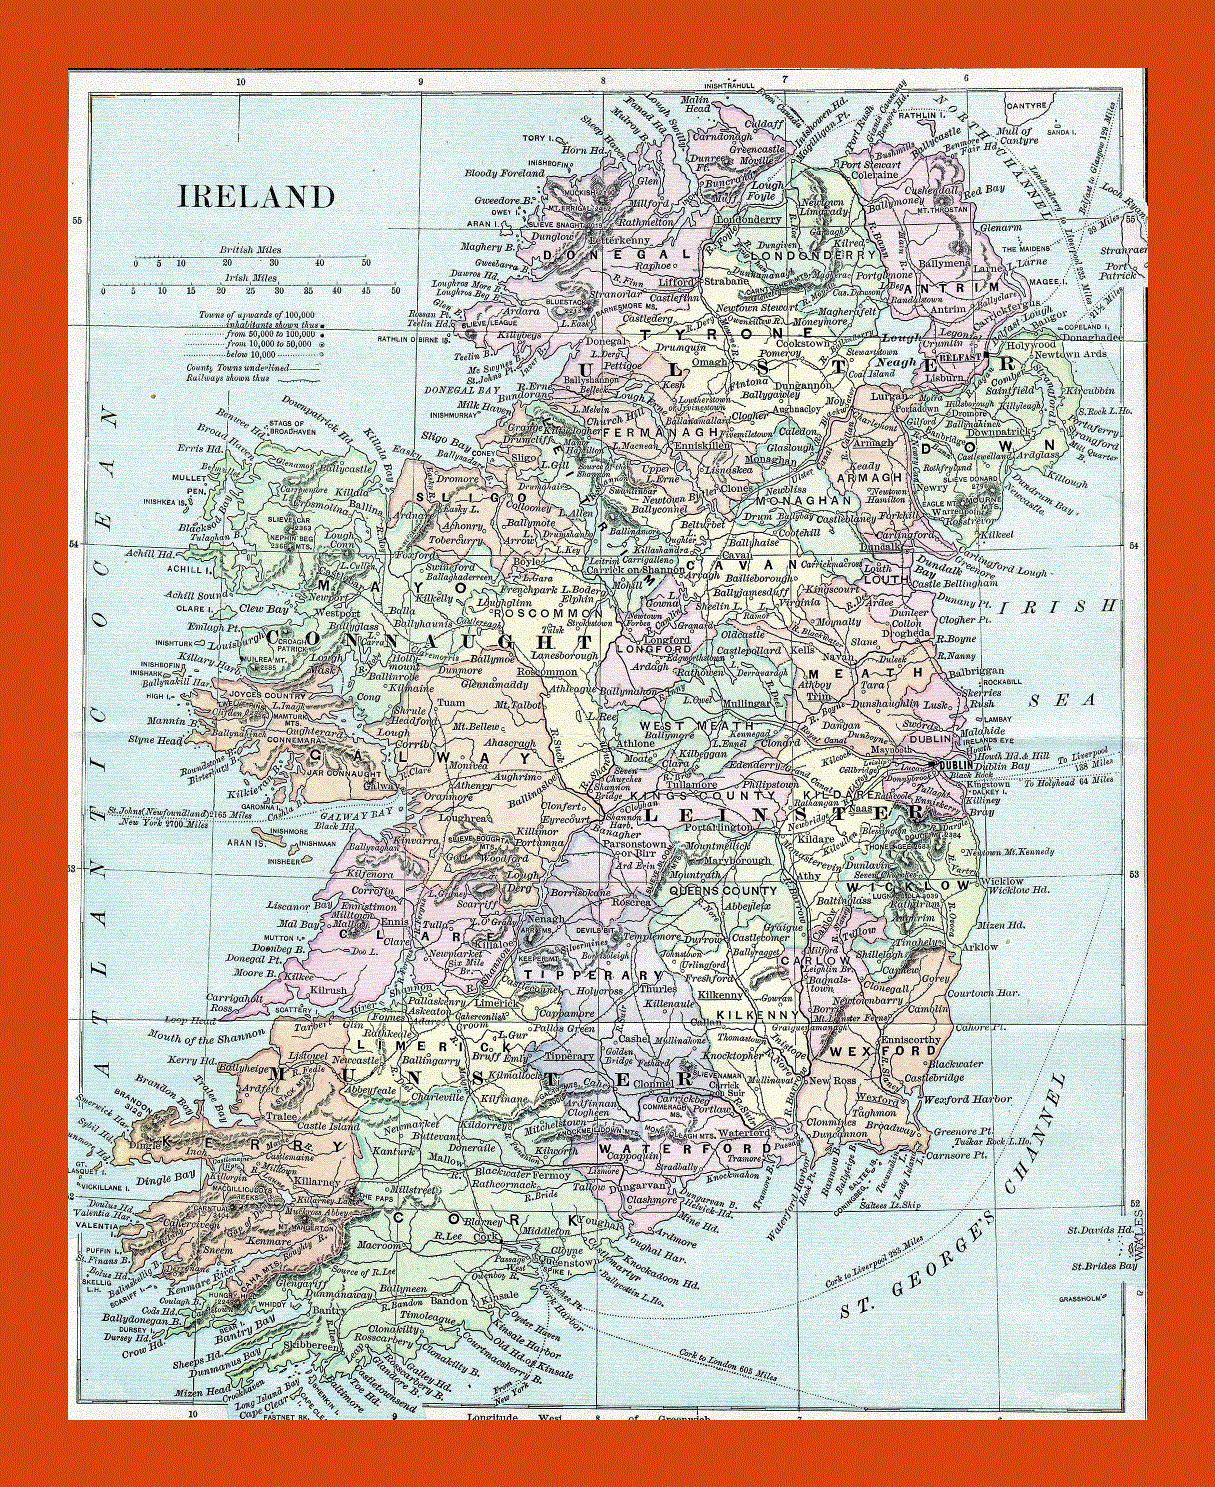 Old map of Ireland